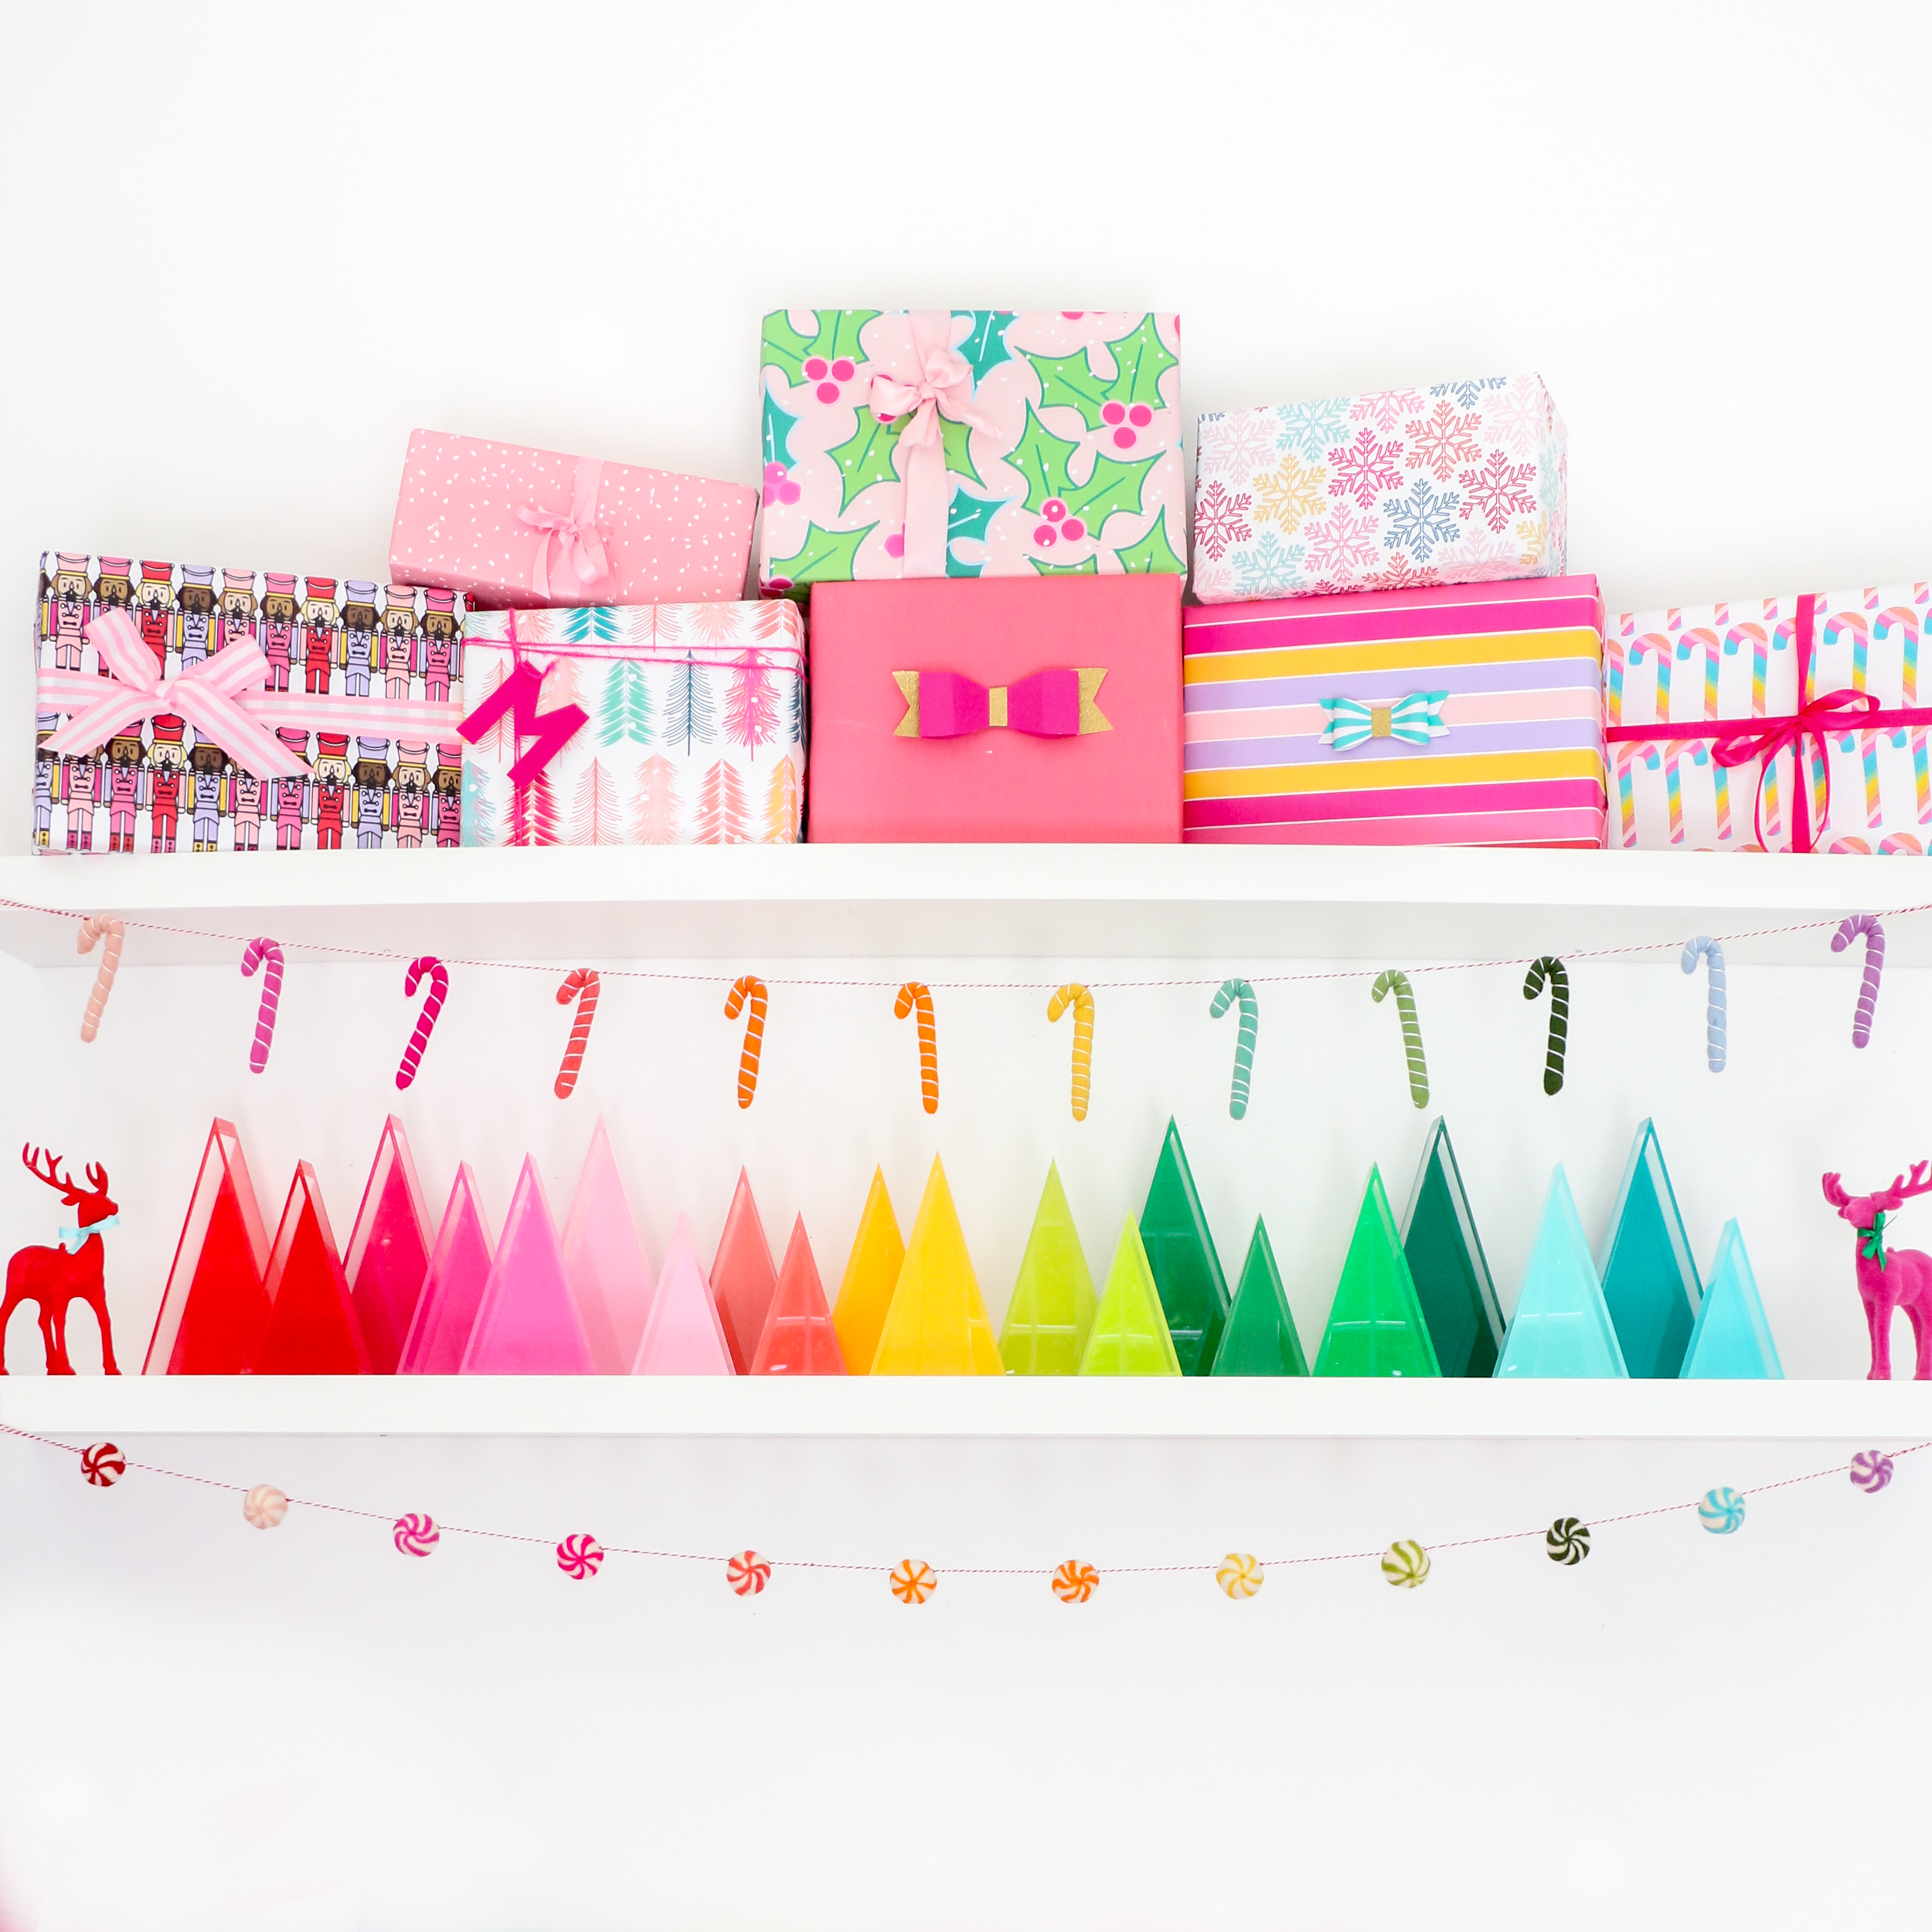 Colorful Gifts Under $50 - Gift Guide - A Kailo Chic Life